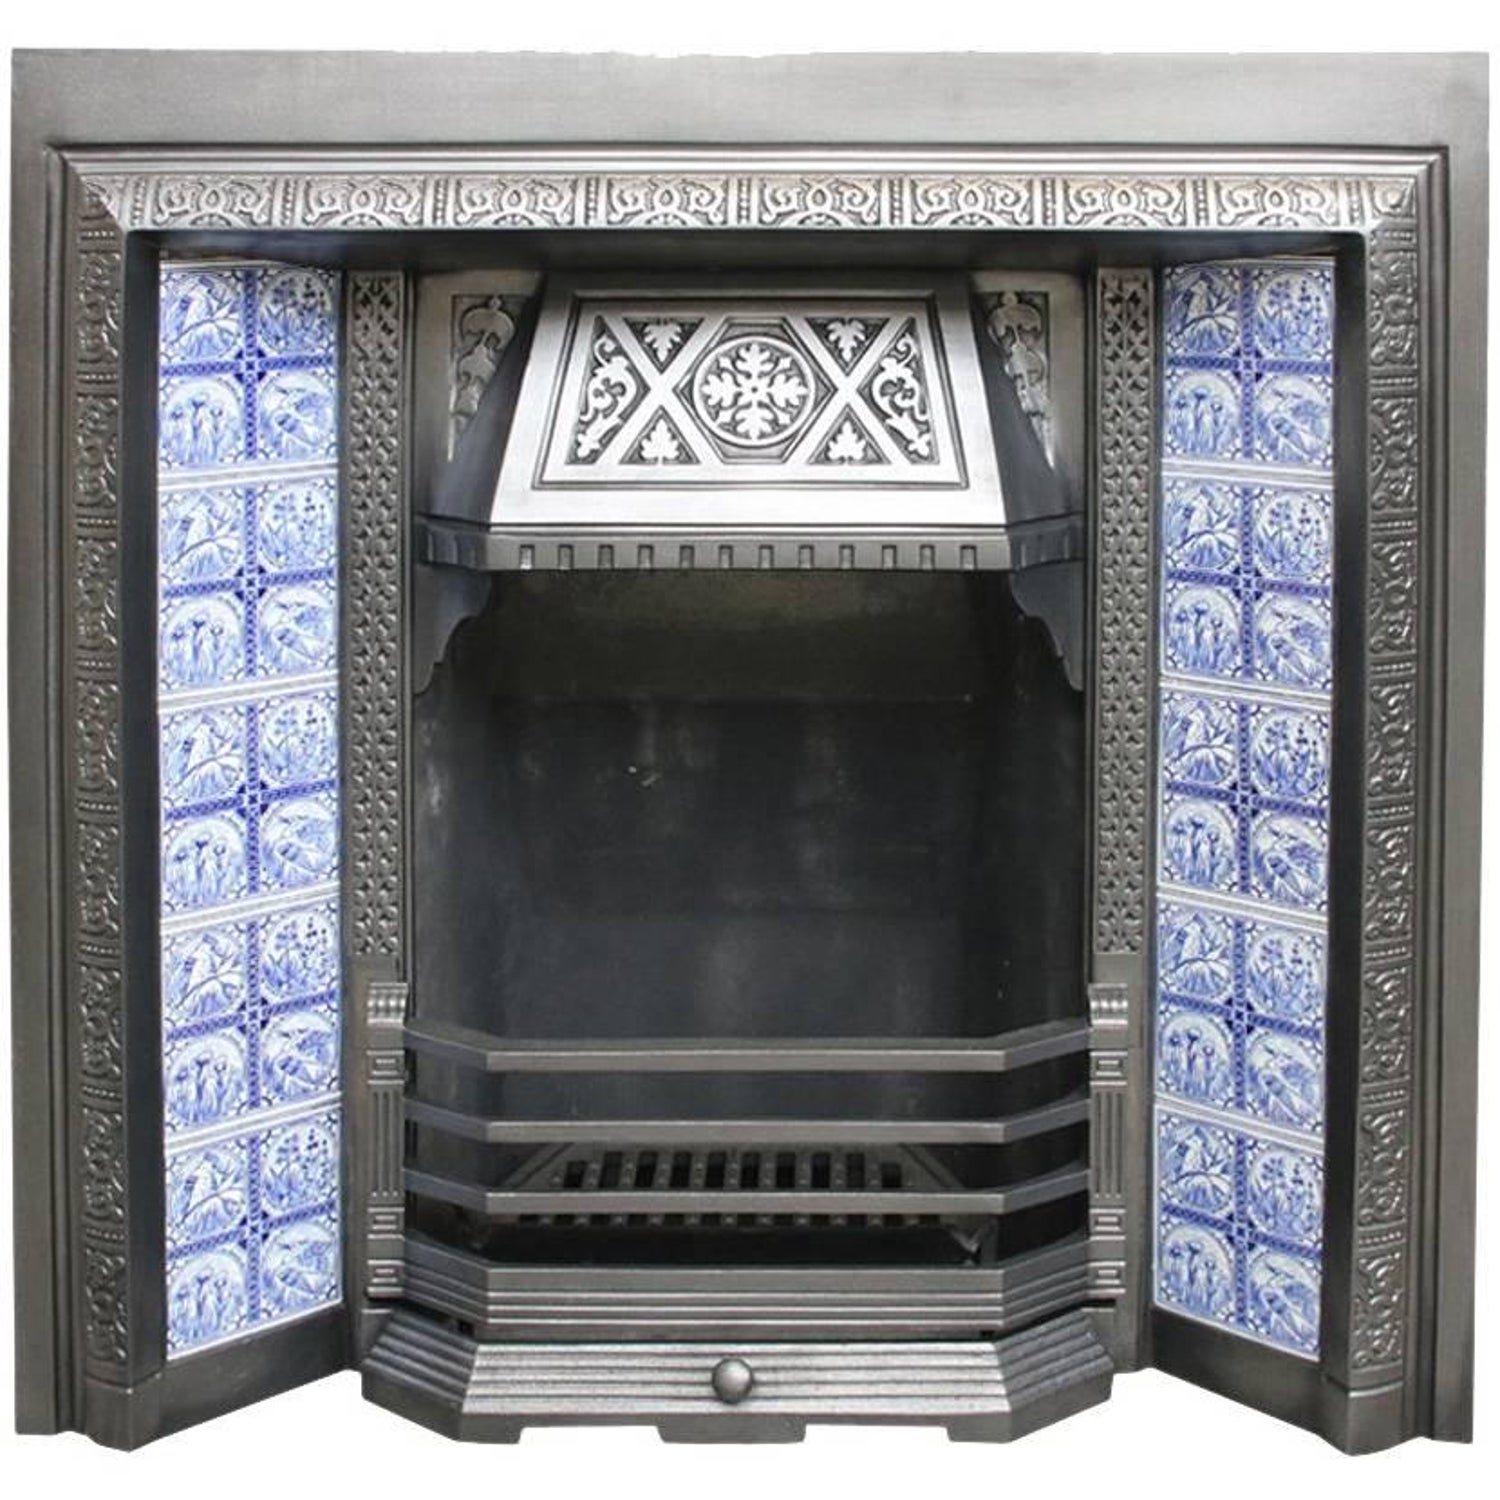 Fireplace Pictures Luxury Restored Antique Aesthetic Cast Iron Fireplace Insert